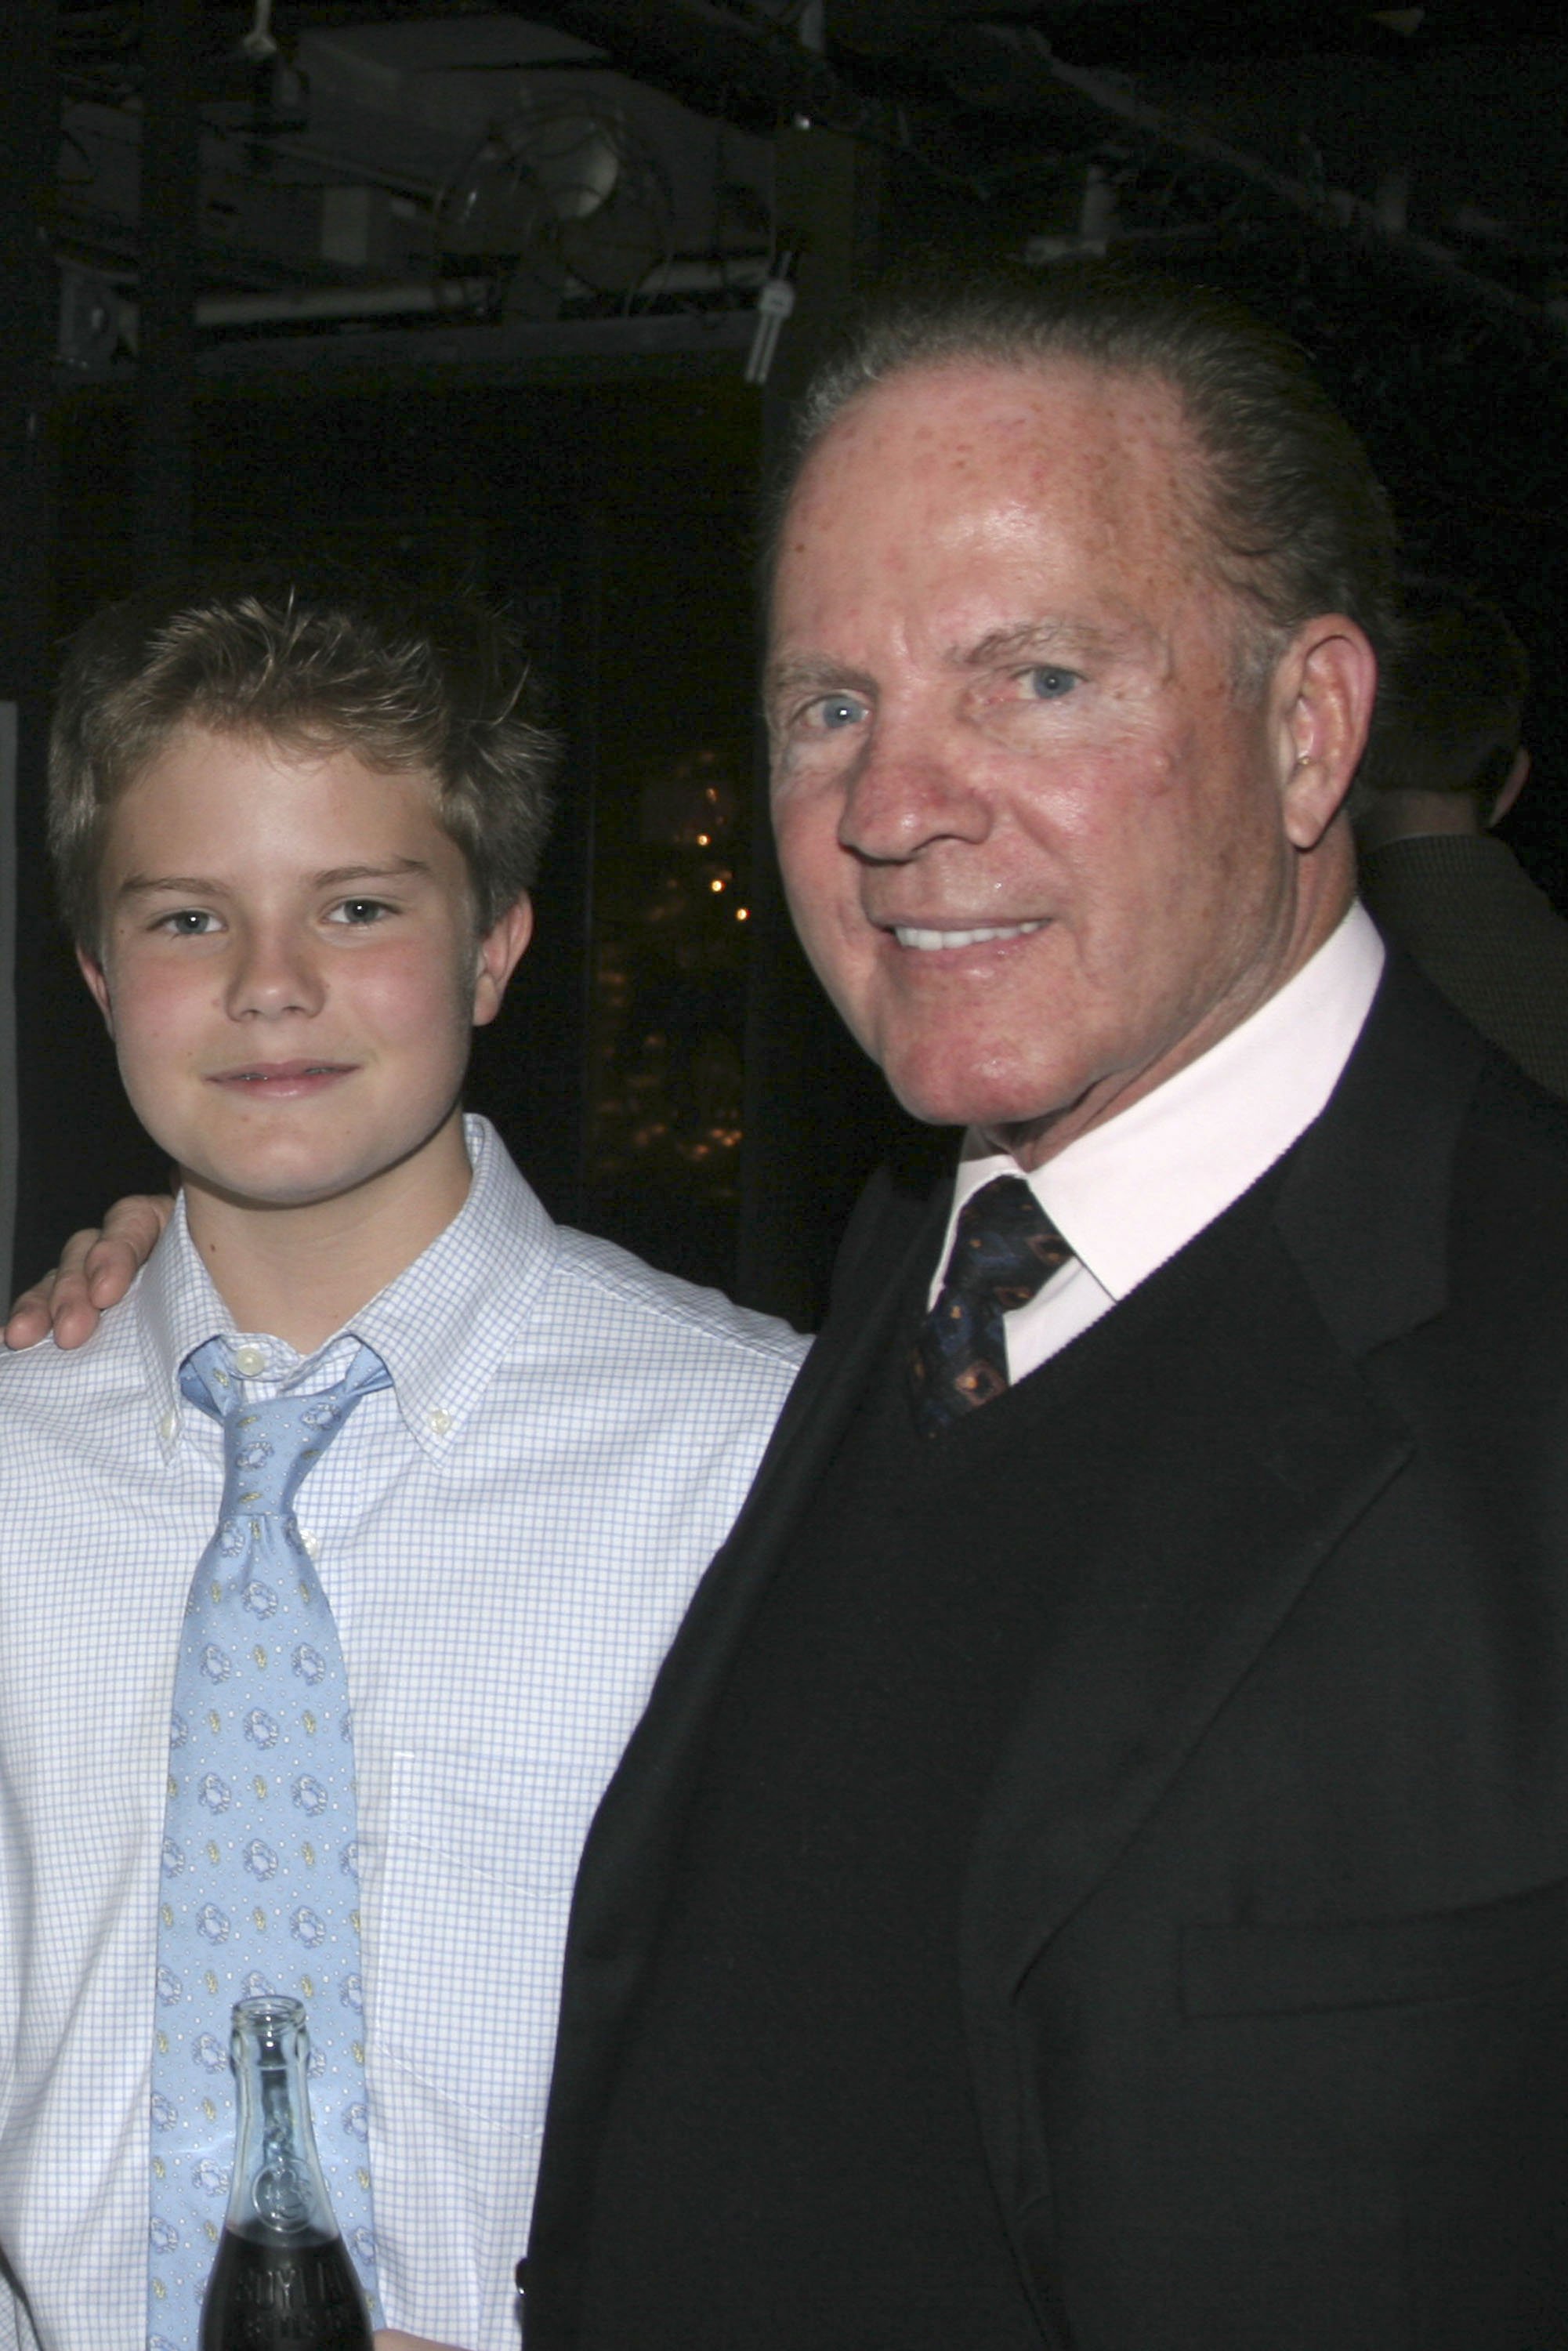 Frank and Cody Gifford during Kathie Lee Gifford's musical "Under The Bridge" opening night afterparty in New York, on January 7, 2005 | Source: Getty Images